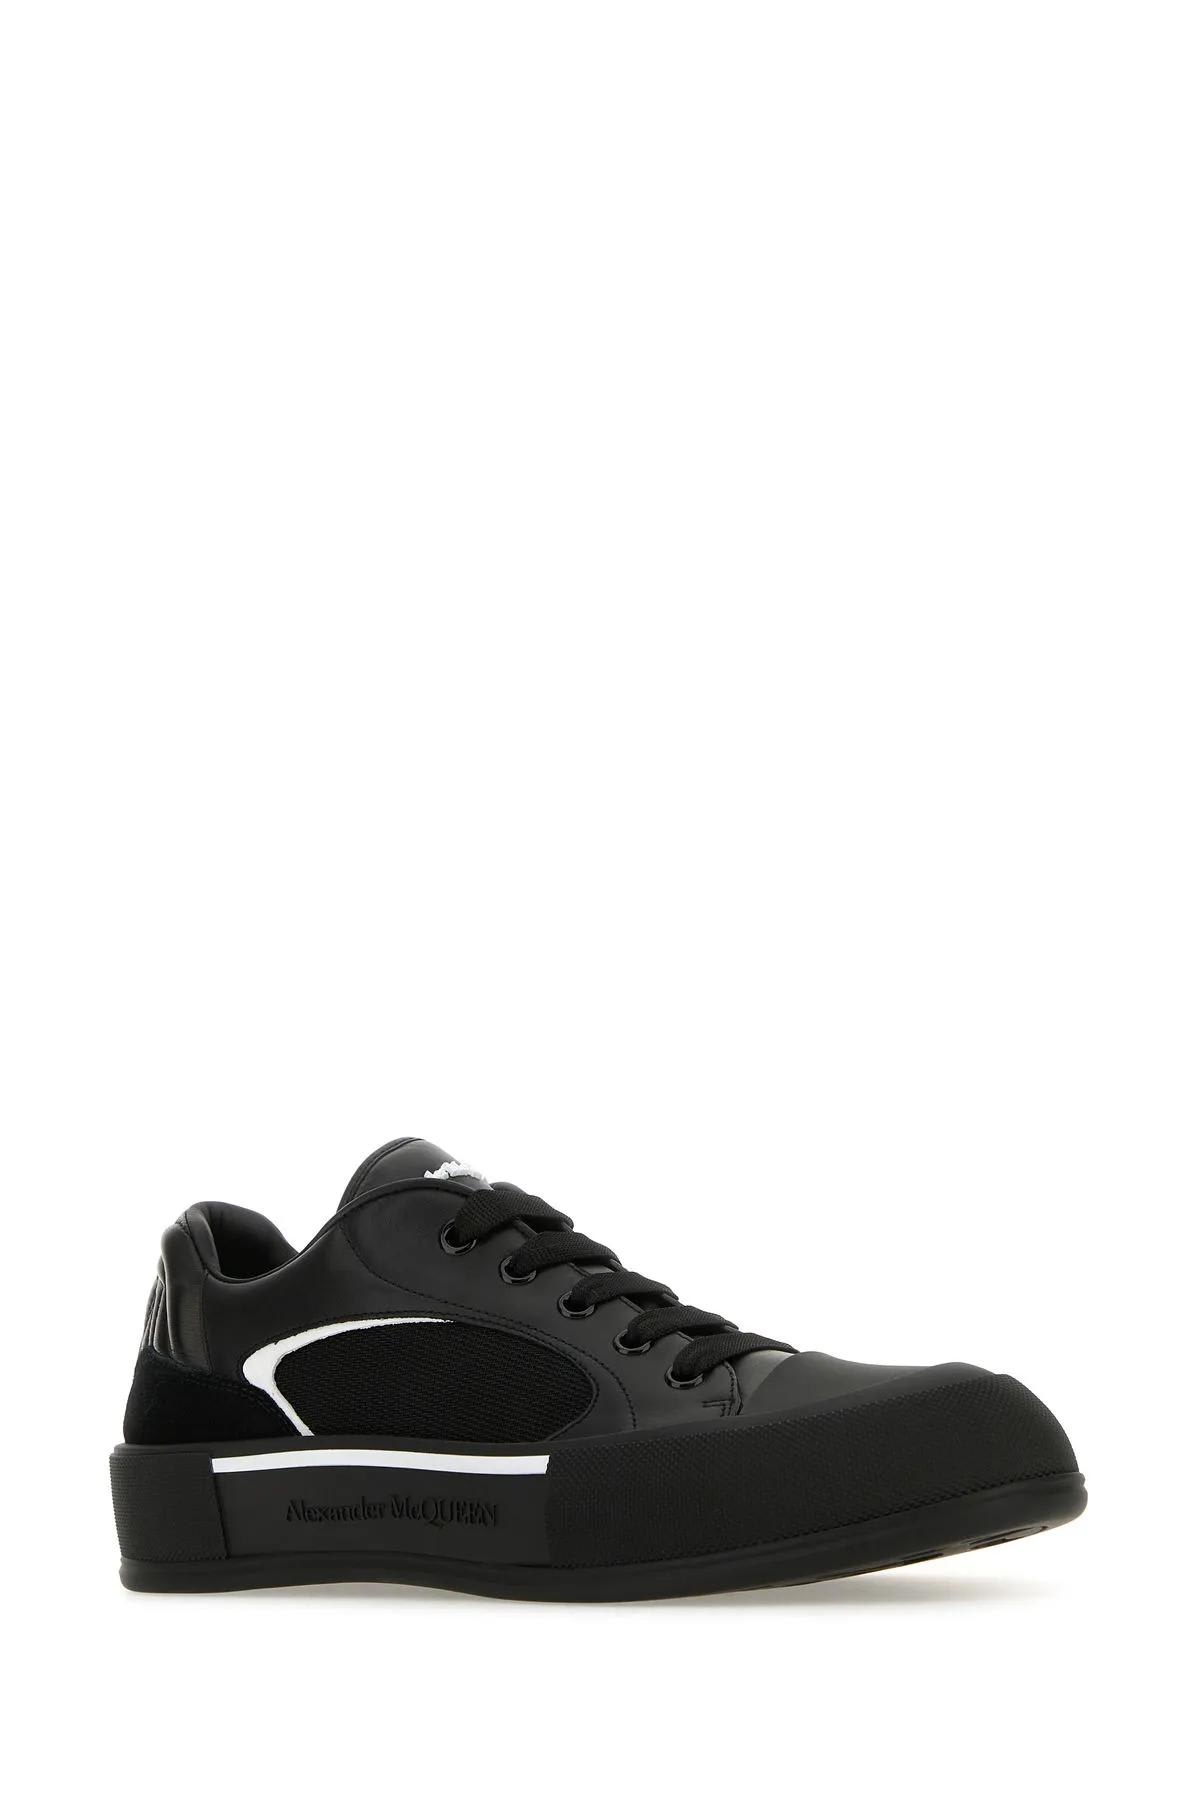 Shop Alexander Mcqueen Black Nylon And Leather Plimsoll Sneakers